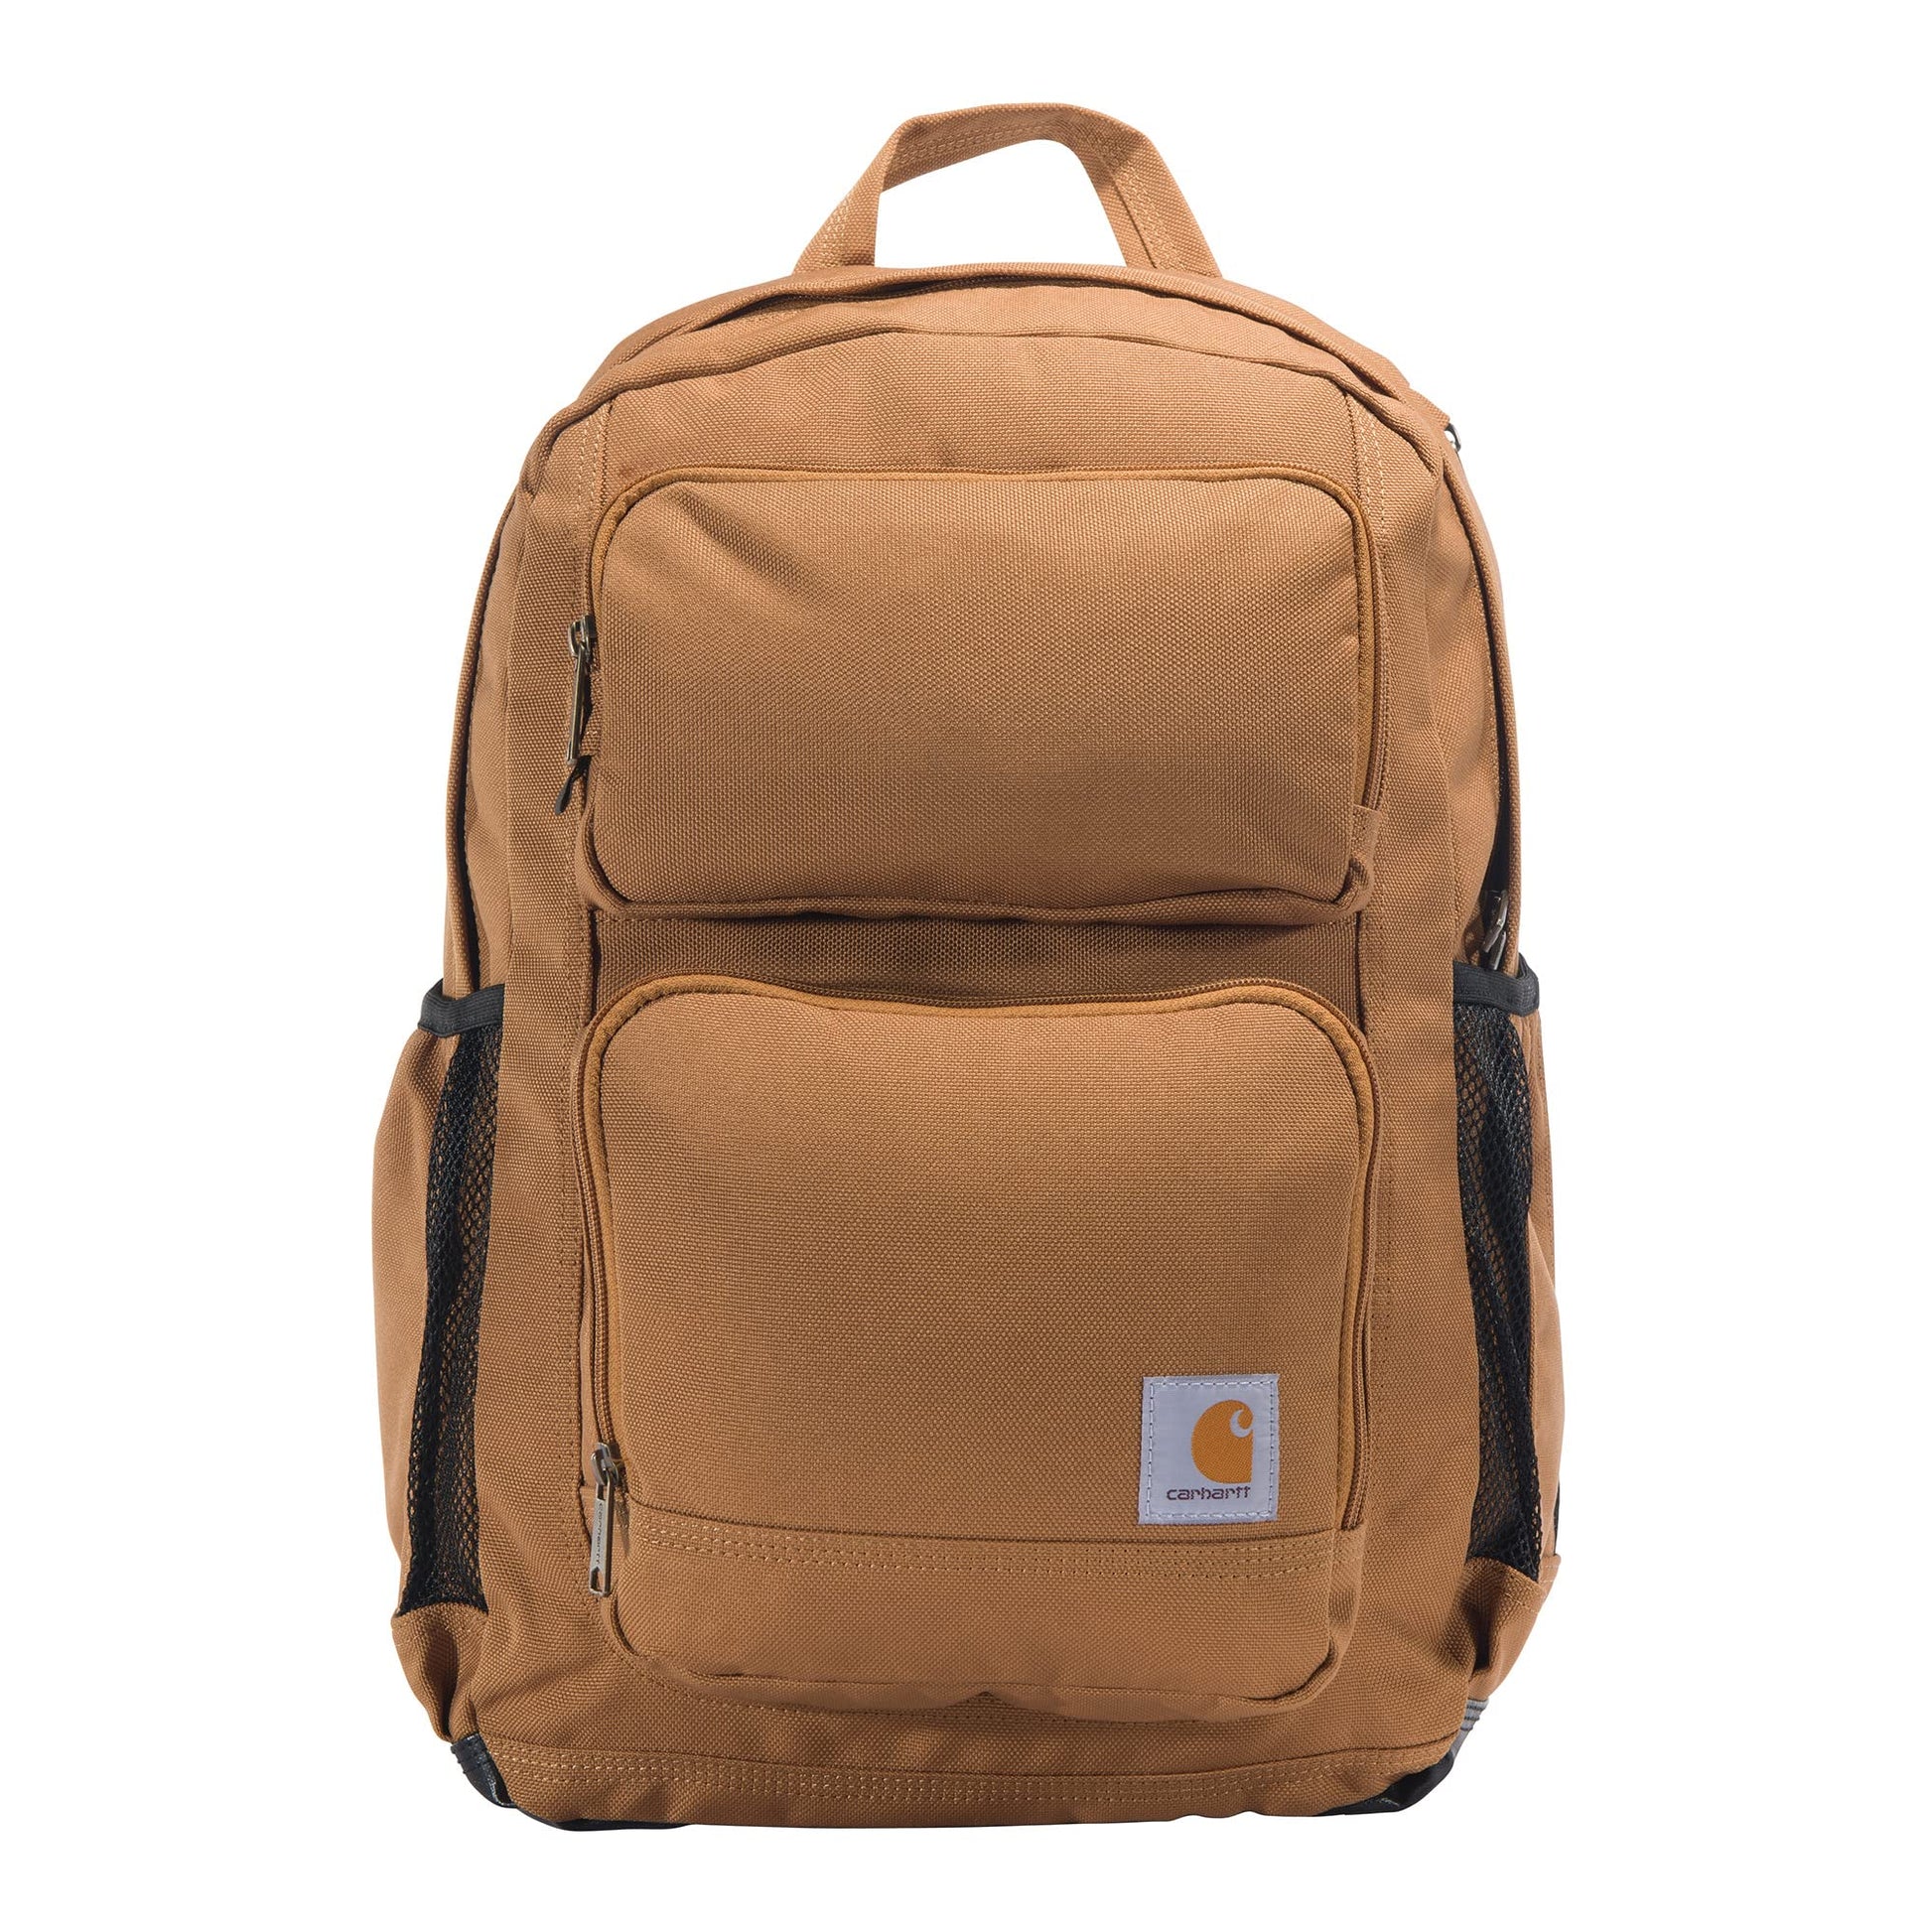 Carhartt 28l Dual-Compartment Backpack, Durable Pack with Laptop Sleeve and Duravax Abrasion Resistant Base